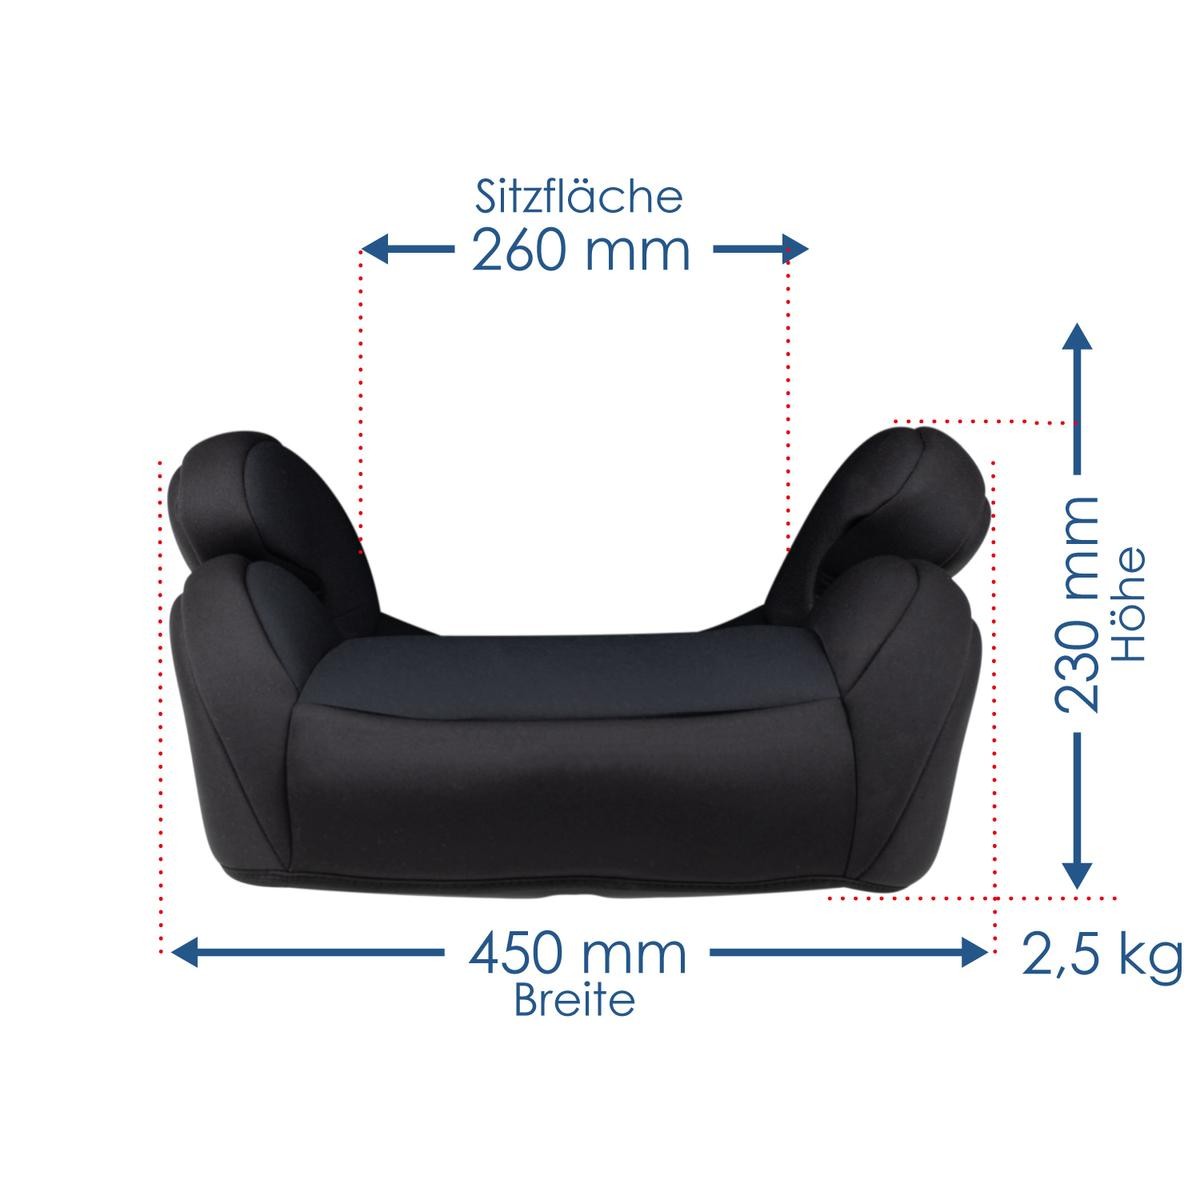 OEM-quality capsula 774110 Backless booster seat